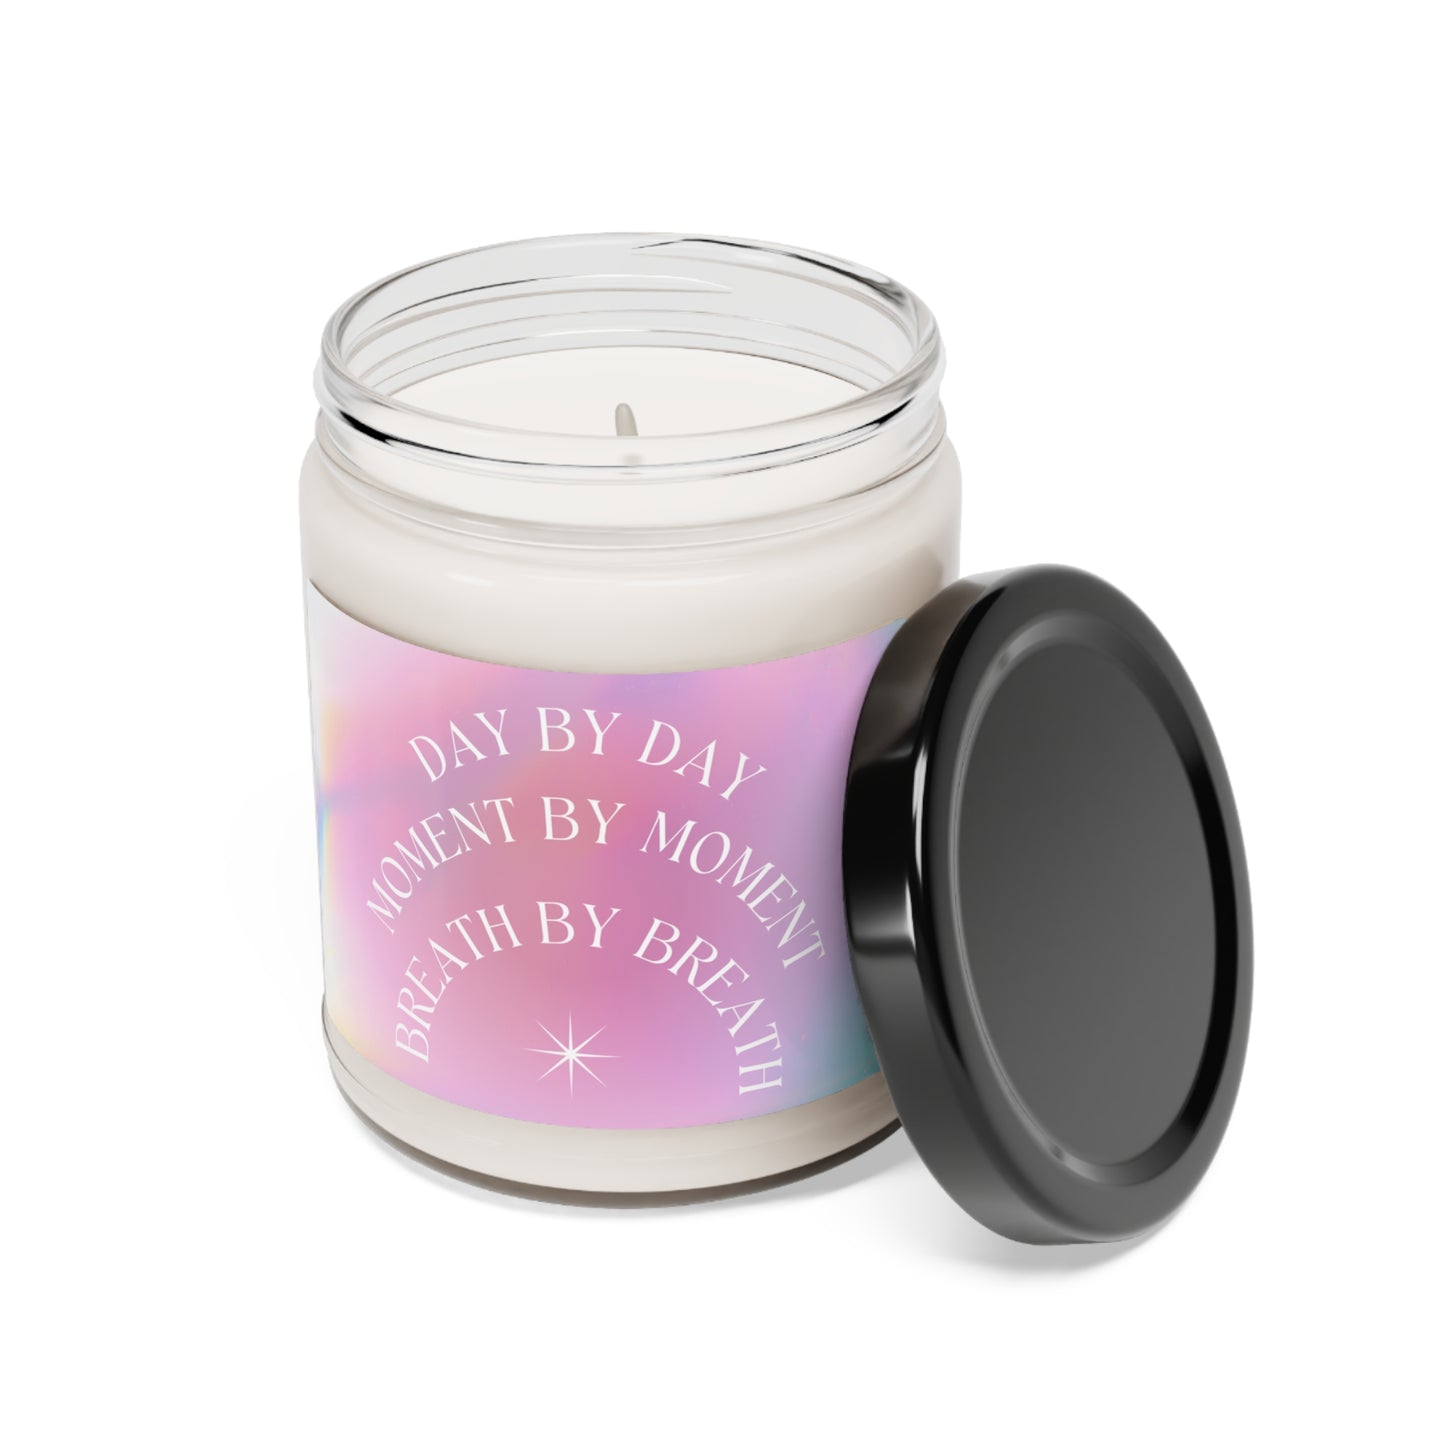 Day by Day Sea Salt & Orchid Scented Soy Self-Care Candle, 9oz